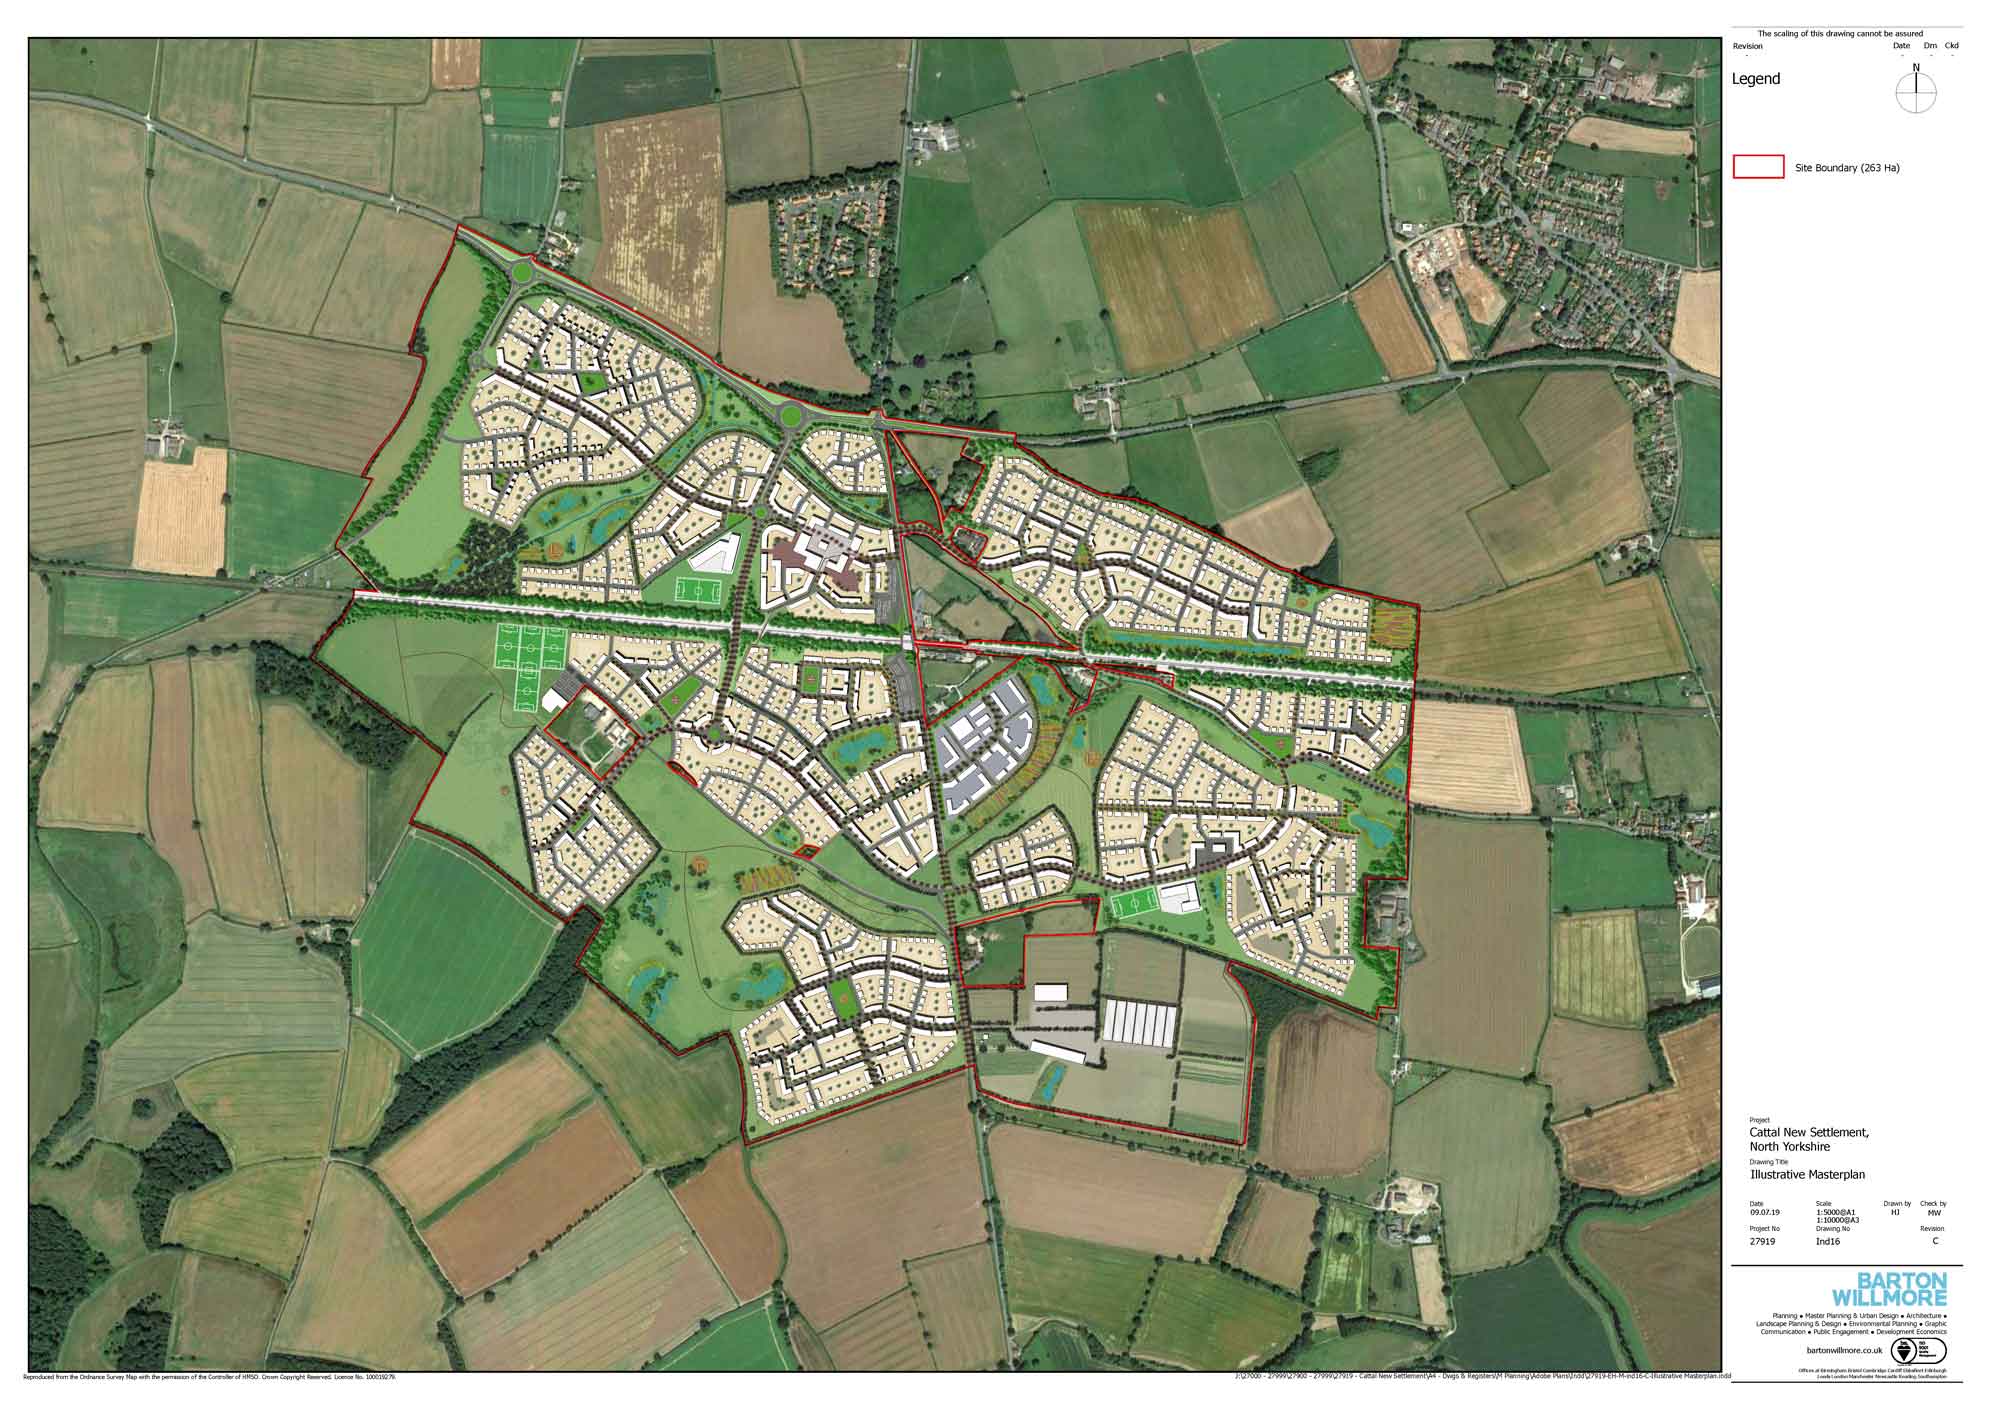 Revised planning application submitted to Harrogate Borough Council for a new settlement around Cattal Station